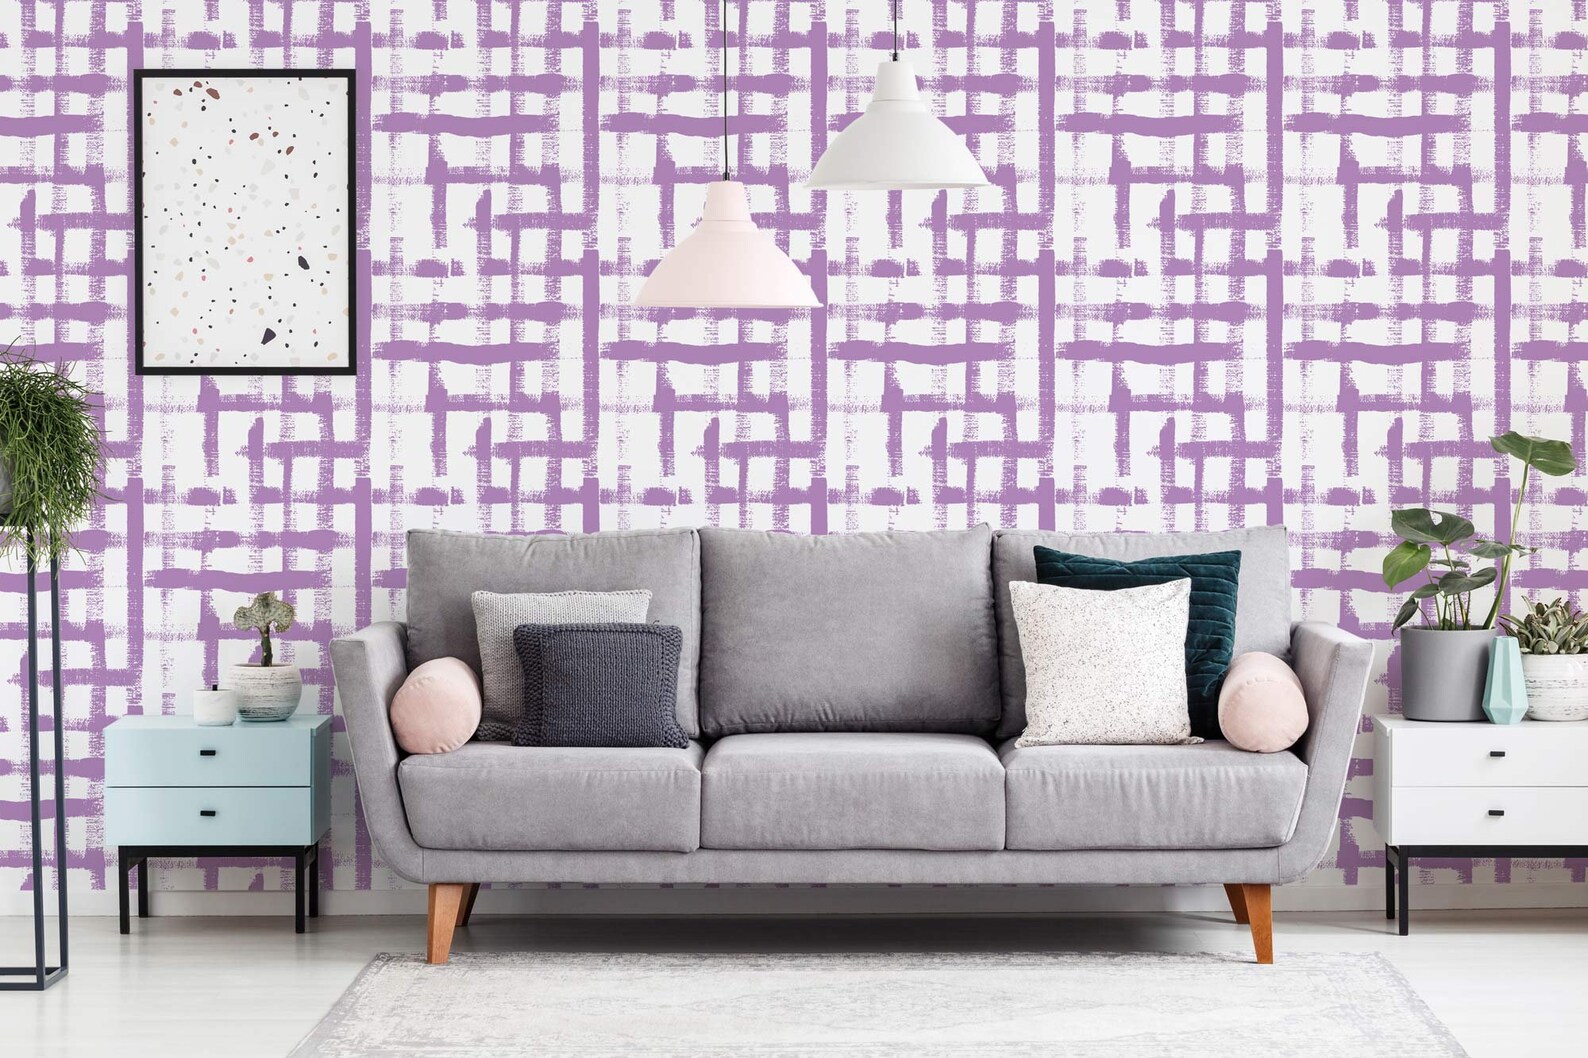 Purple brush stroke self-adhesive wallpaper | Grid removable peel and stick wallpaper - PVC-Free material & Eco-friendly Inks - Etsy